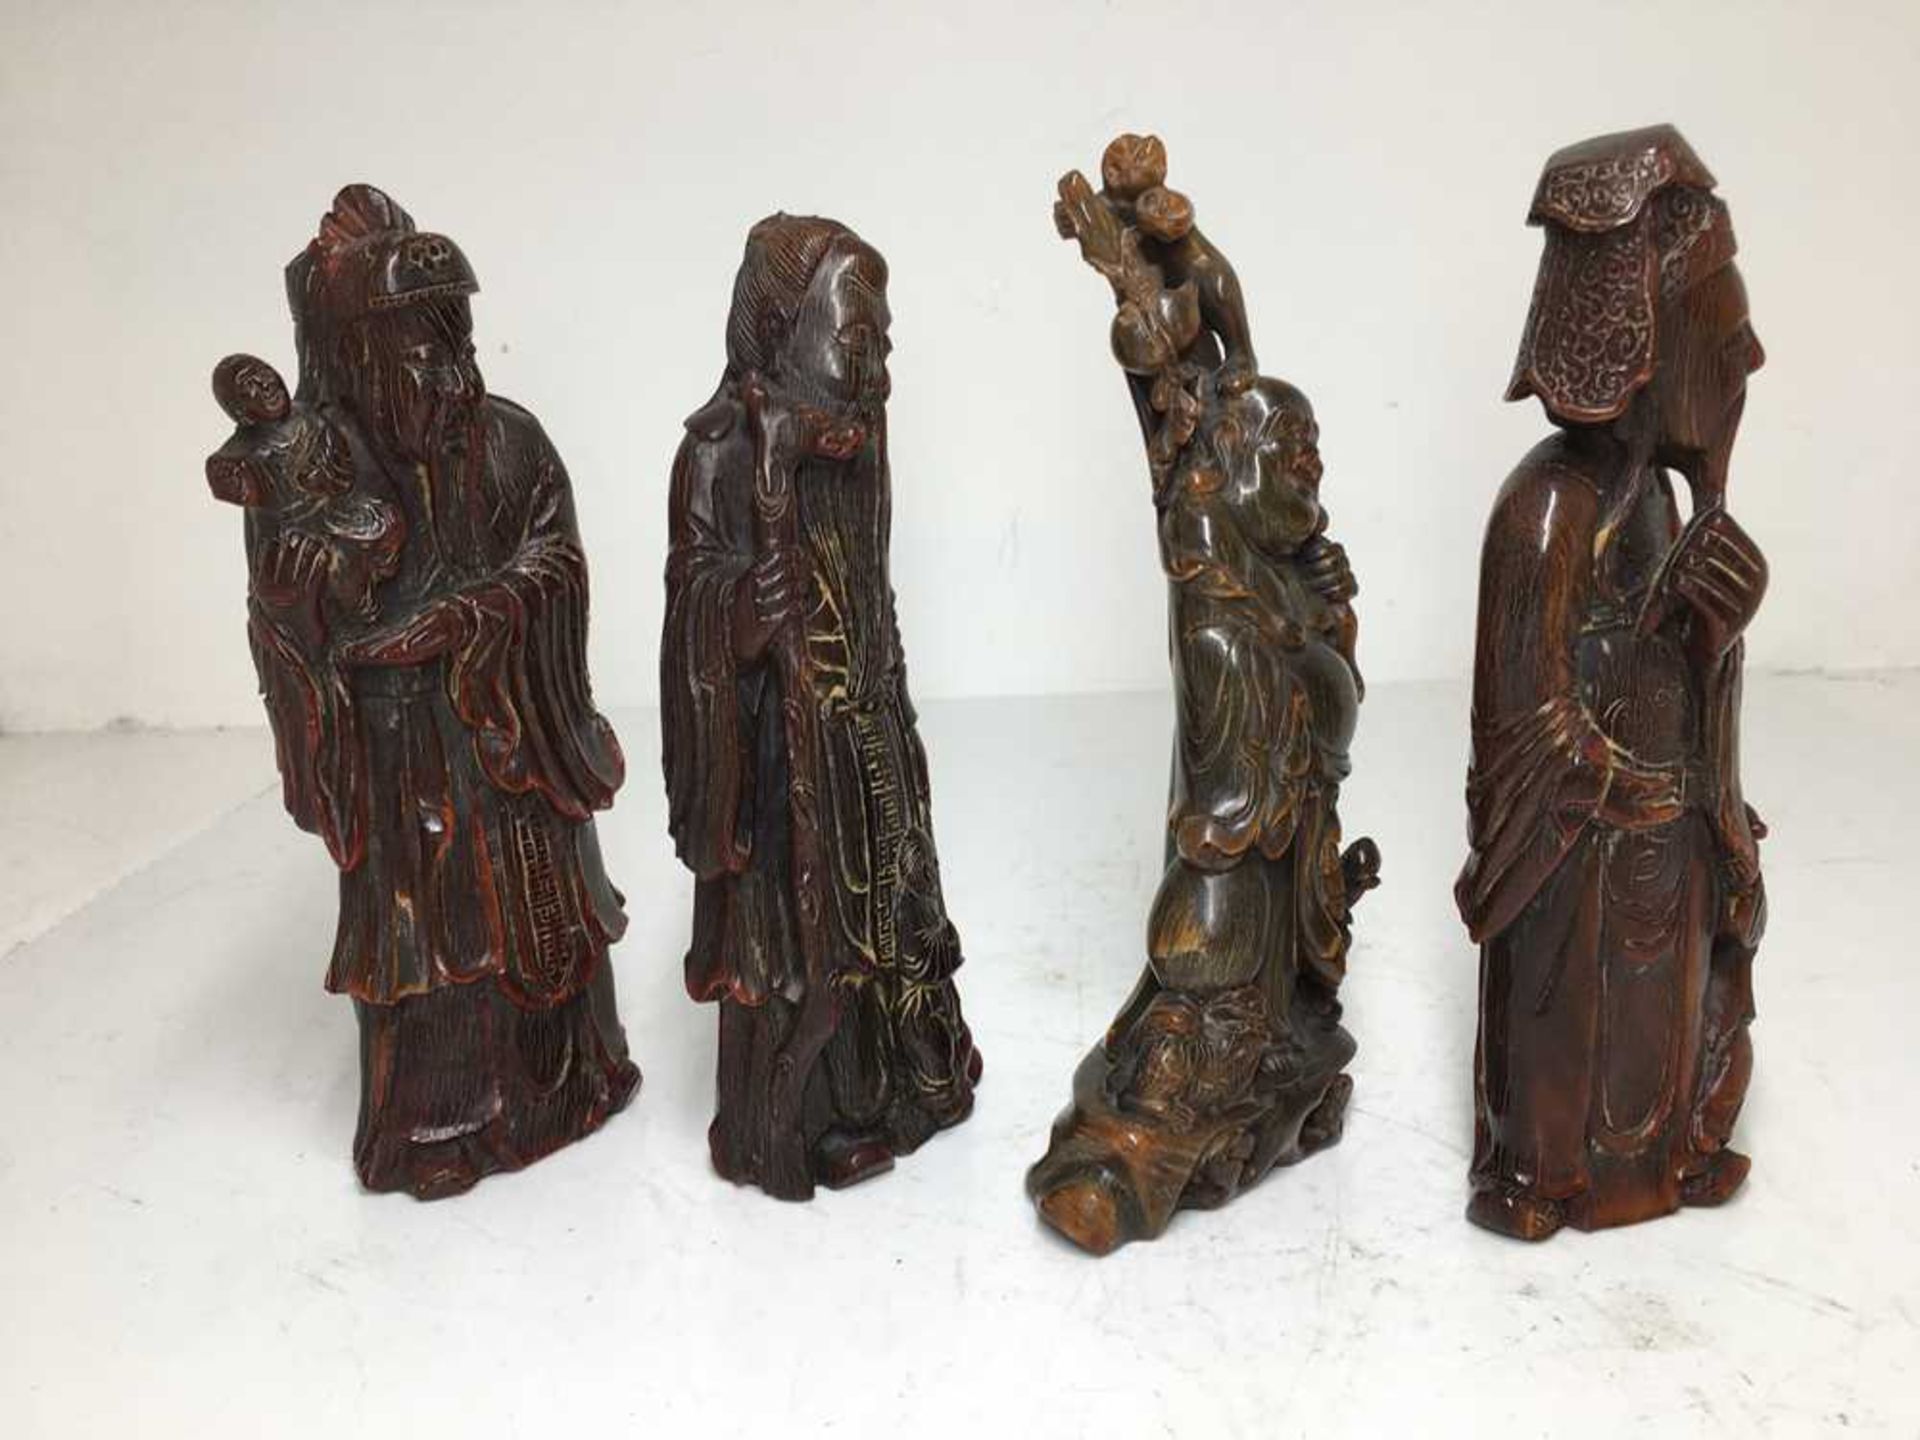 GROUP OF SIX CARVED BUFFALO HORN FIGURES 19TH-20TH CENTURY - Image 15 of 26